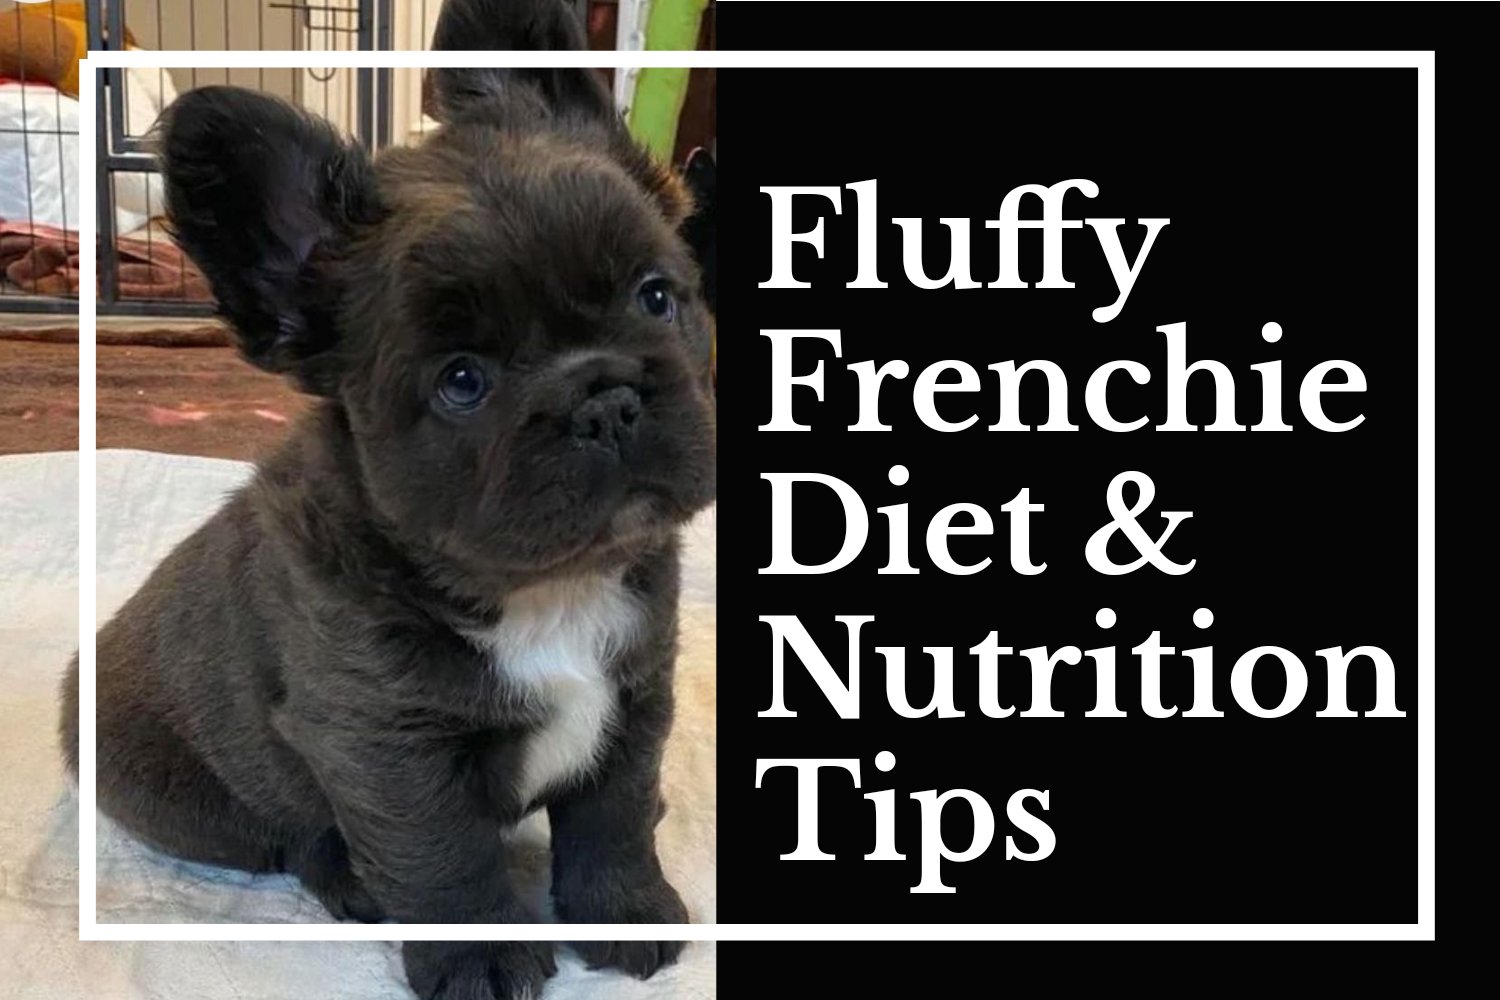 Fluffy Frenchie Diet & Nutrition Tips